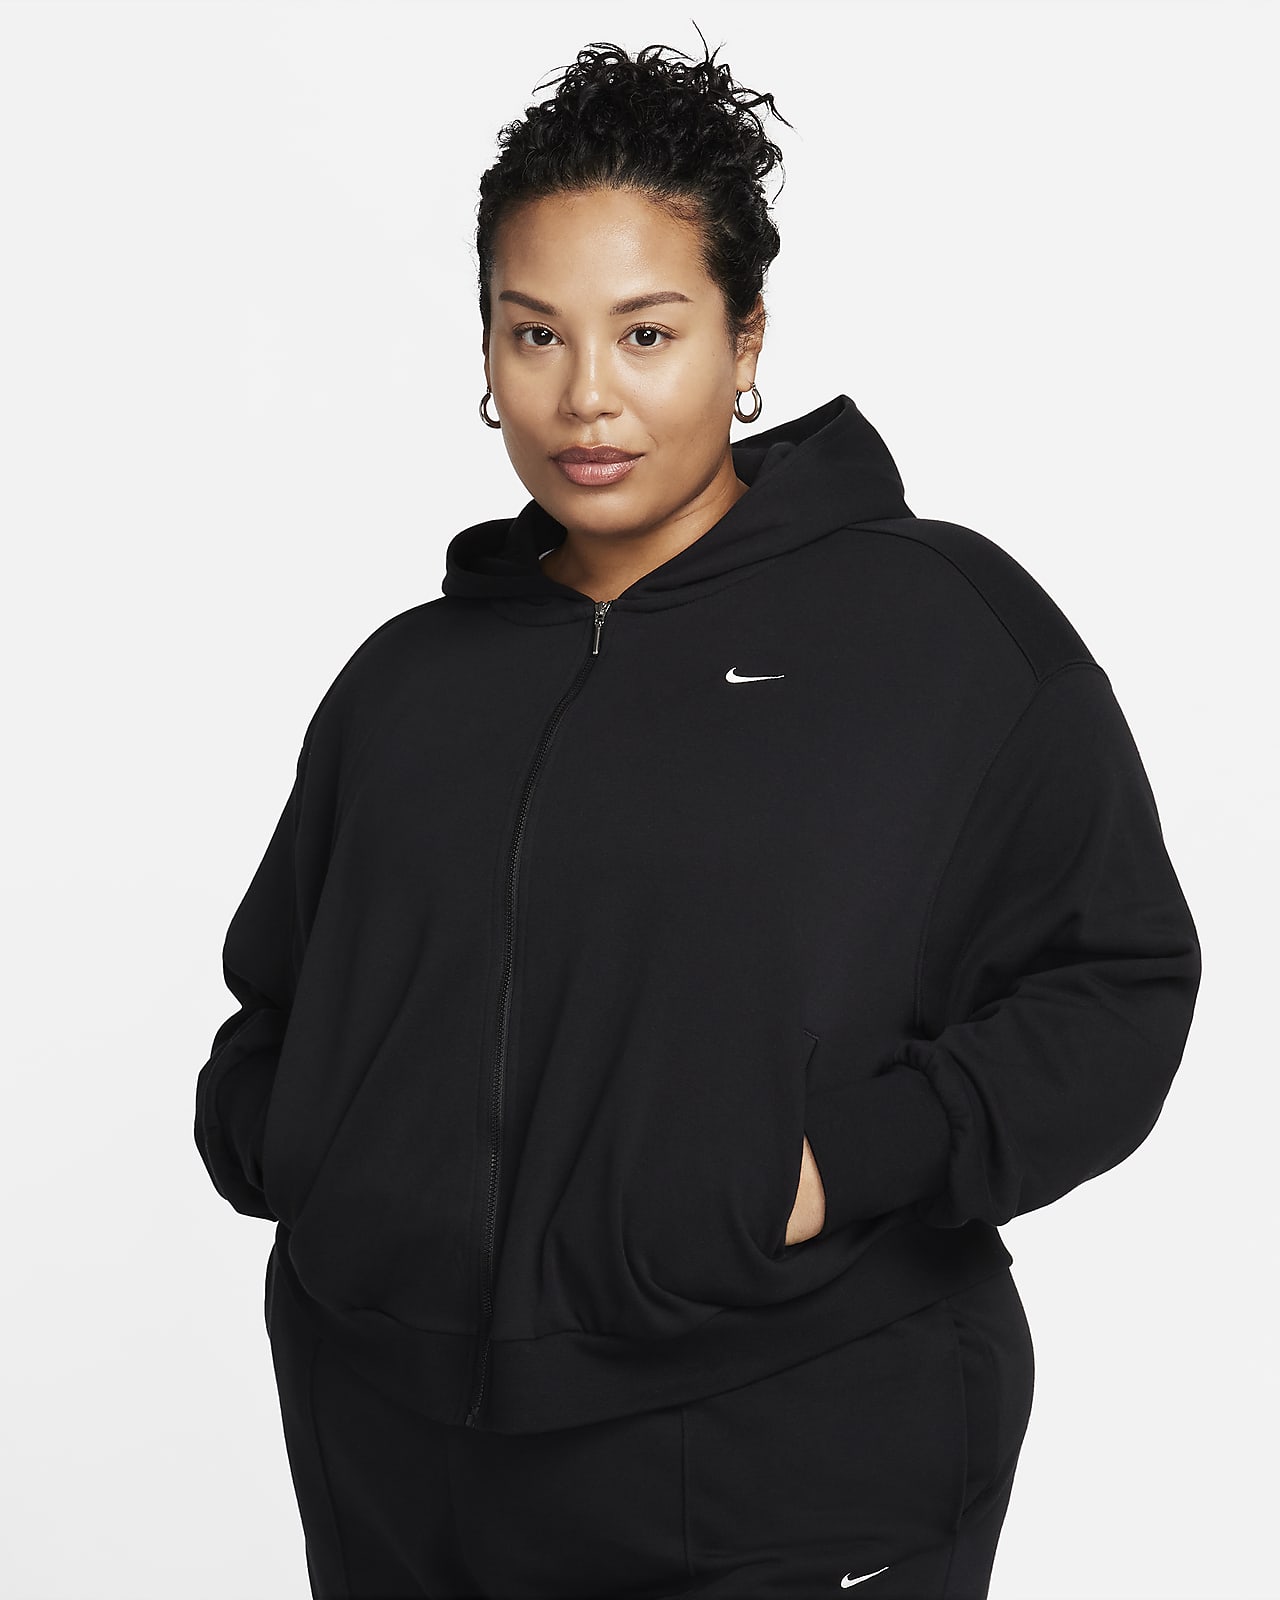 https://static.nike.com/a/images/t_PDP_1280_v1/f_auto,q_auto:eco/a13180c3-f435-45a4-9e0d-d8c14b6b9cb1/sportswear-chill-terry-womens-loose-full-zip-french-terry-hoodie-plus-size-S9RSVc.png